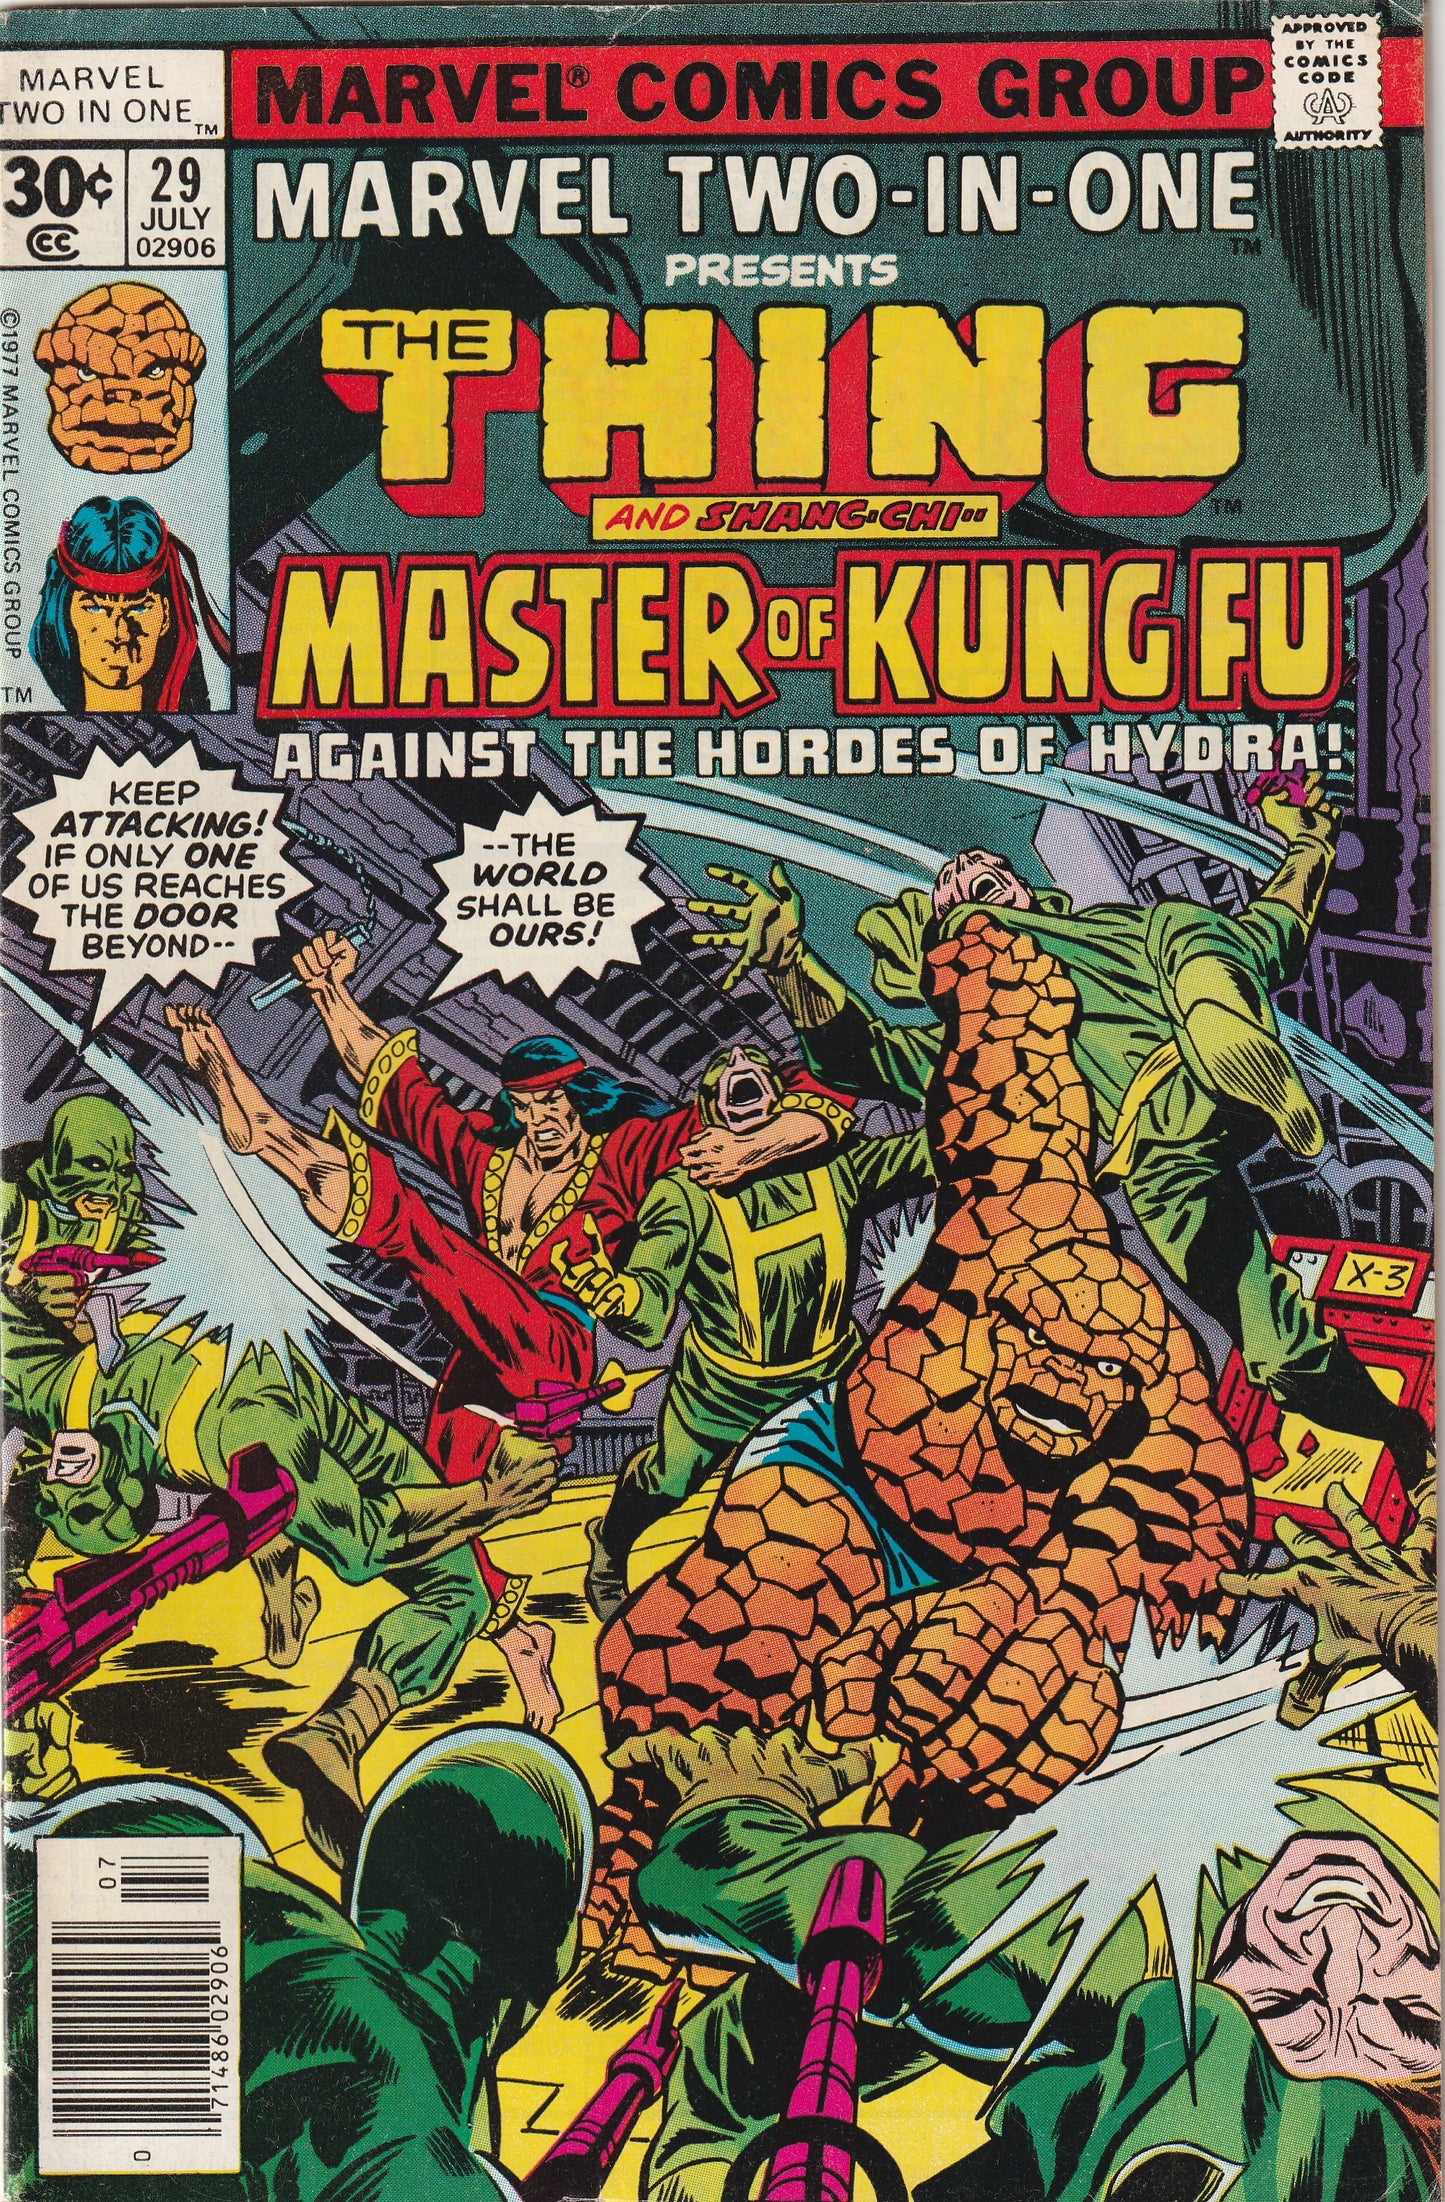 Marvel Two-in-One #29 (1977) - Master of Kung Fu